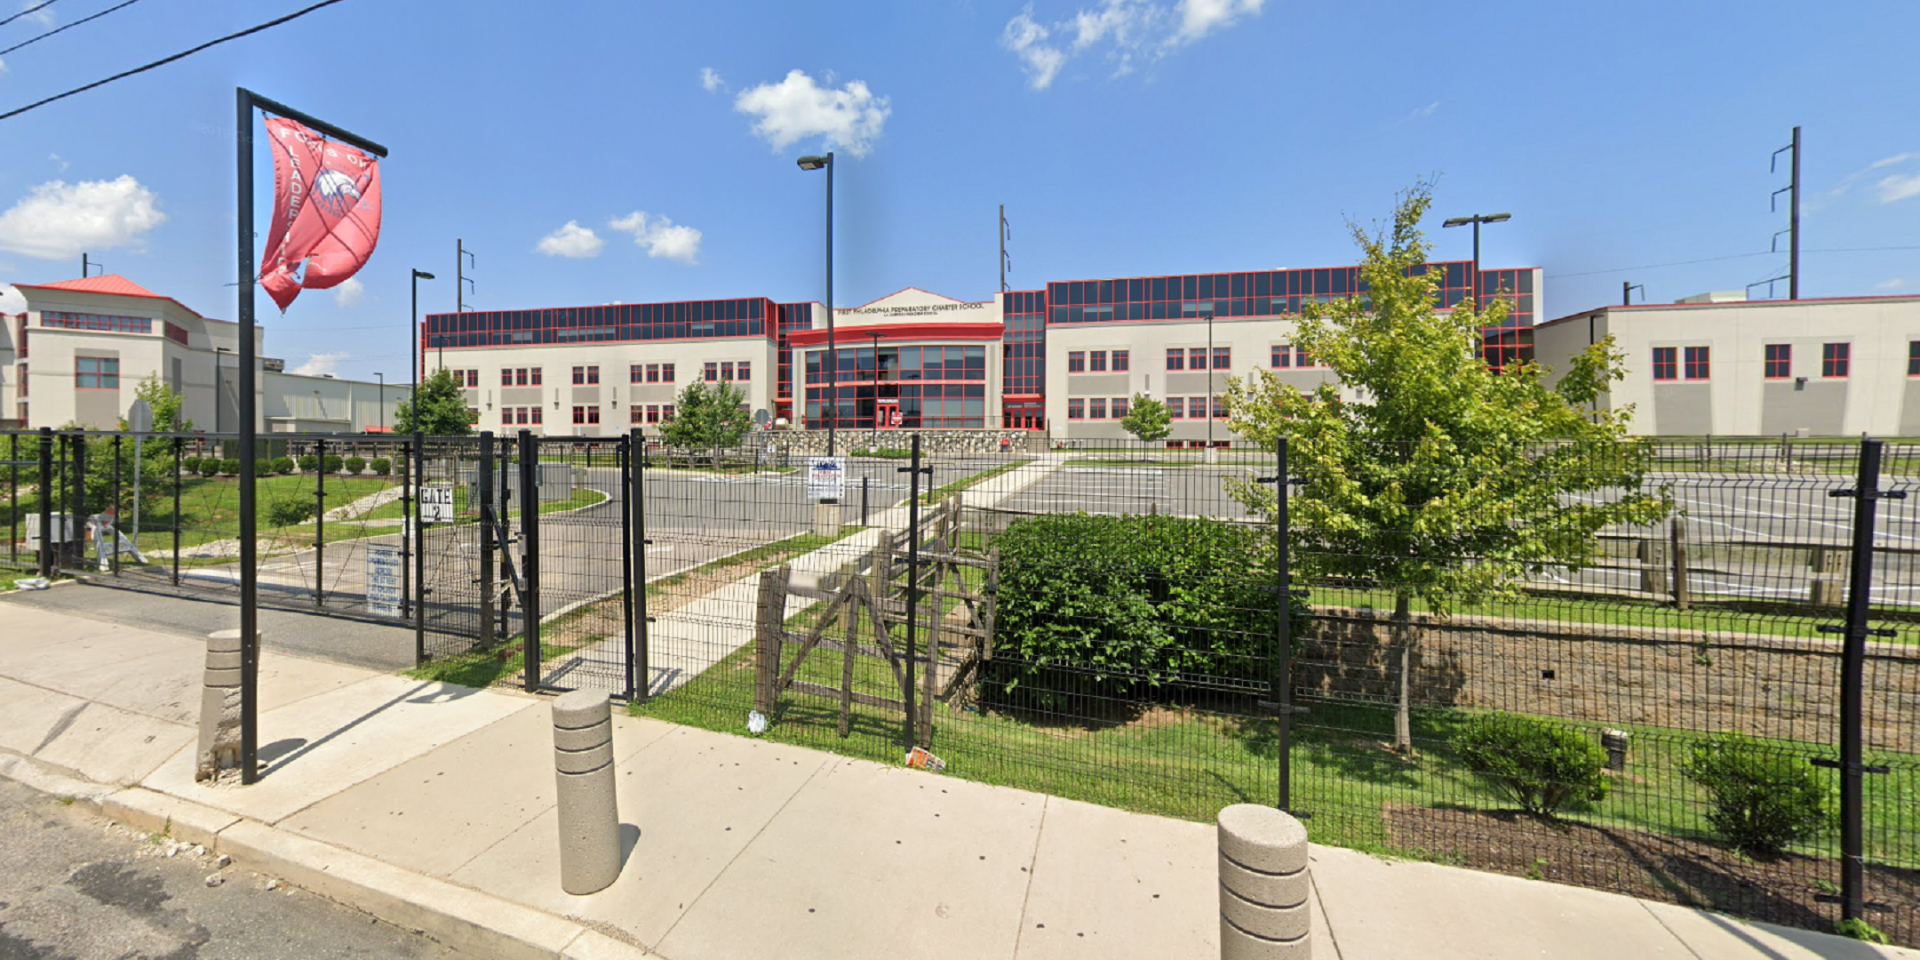 First Philadelphia Preparatory Charter School in Bridesburg has a large deficit, a CEO on leave, and some sort of problem related to the identification of special education students.